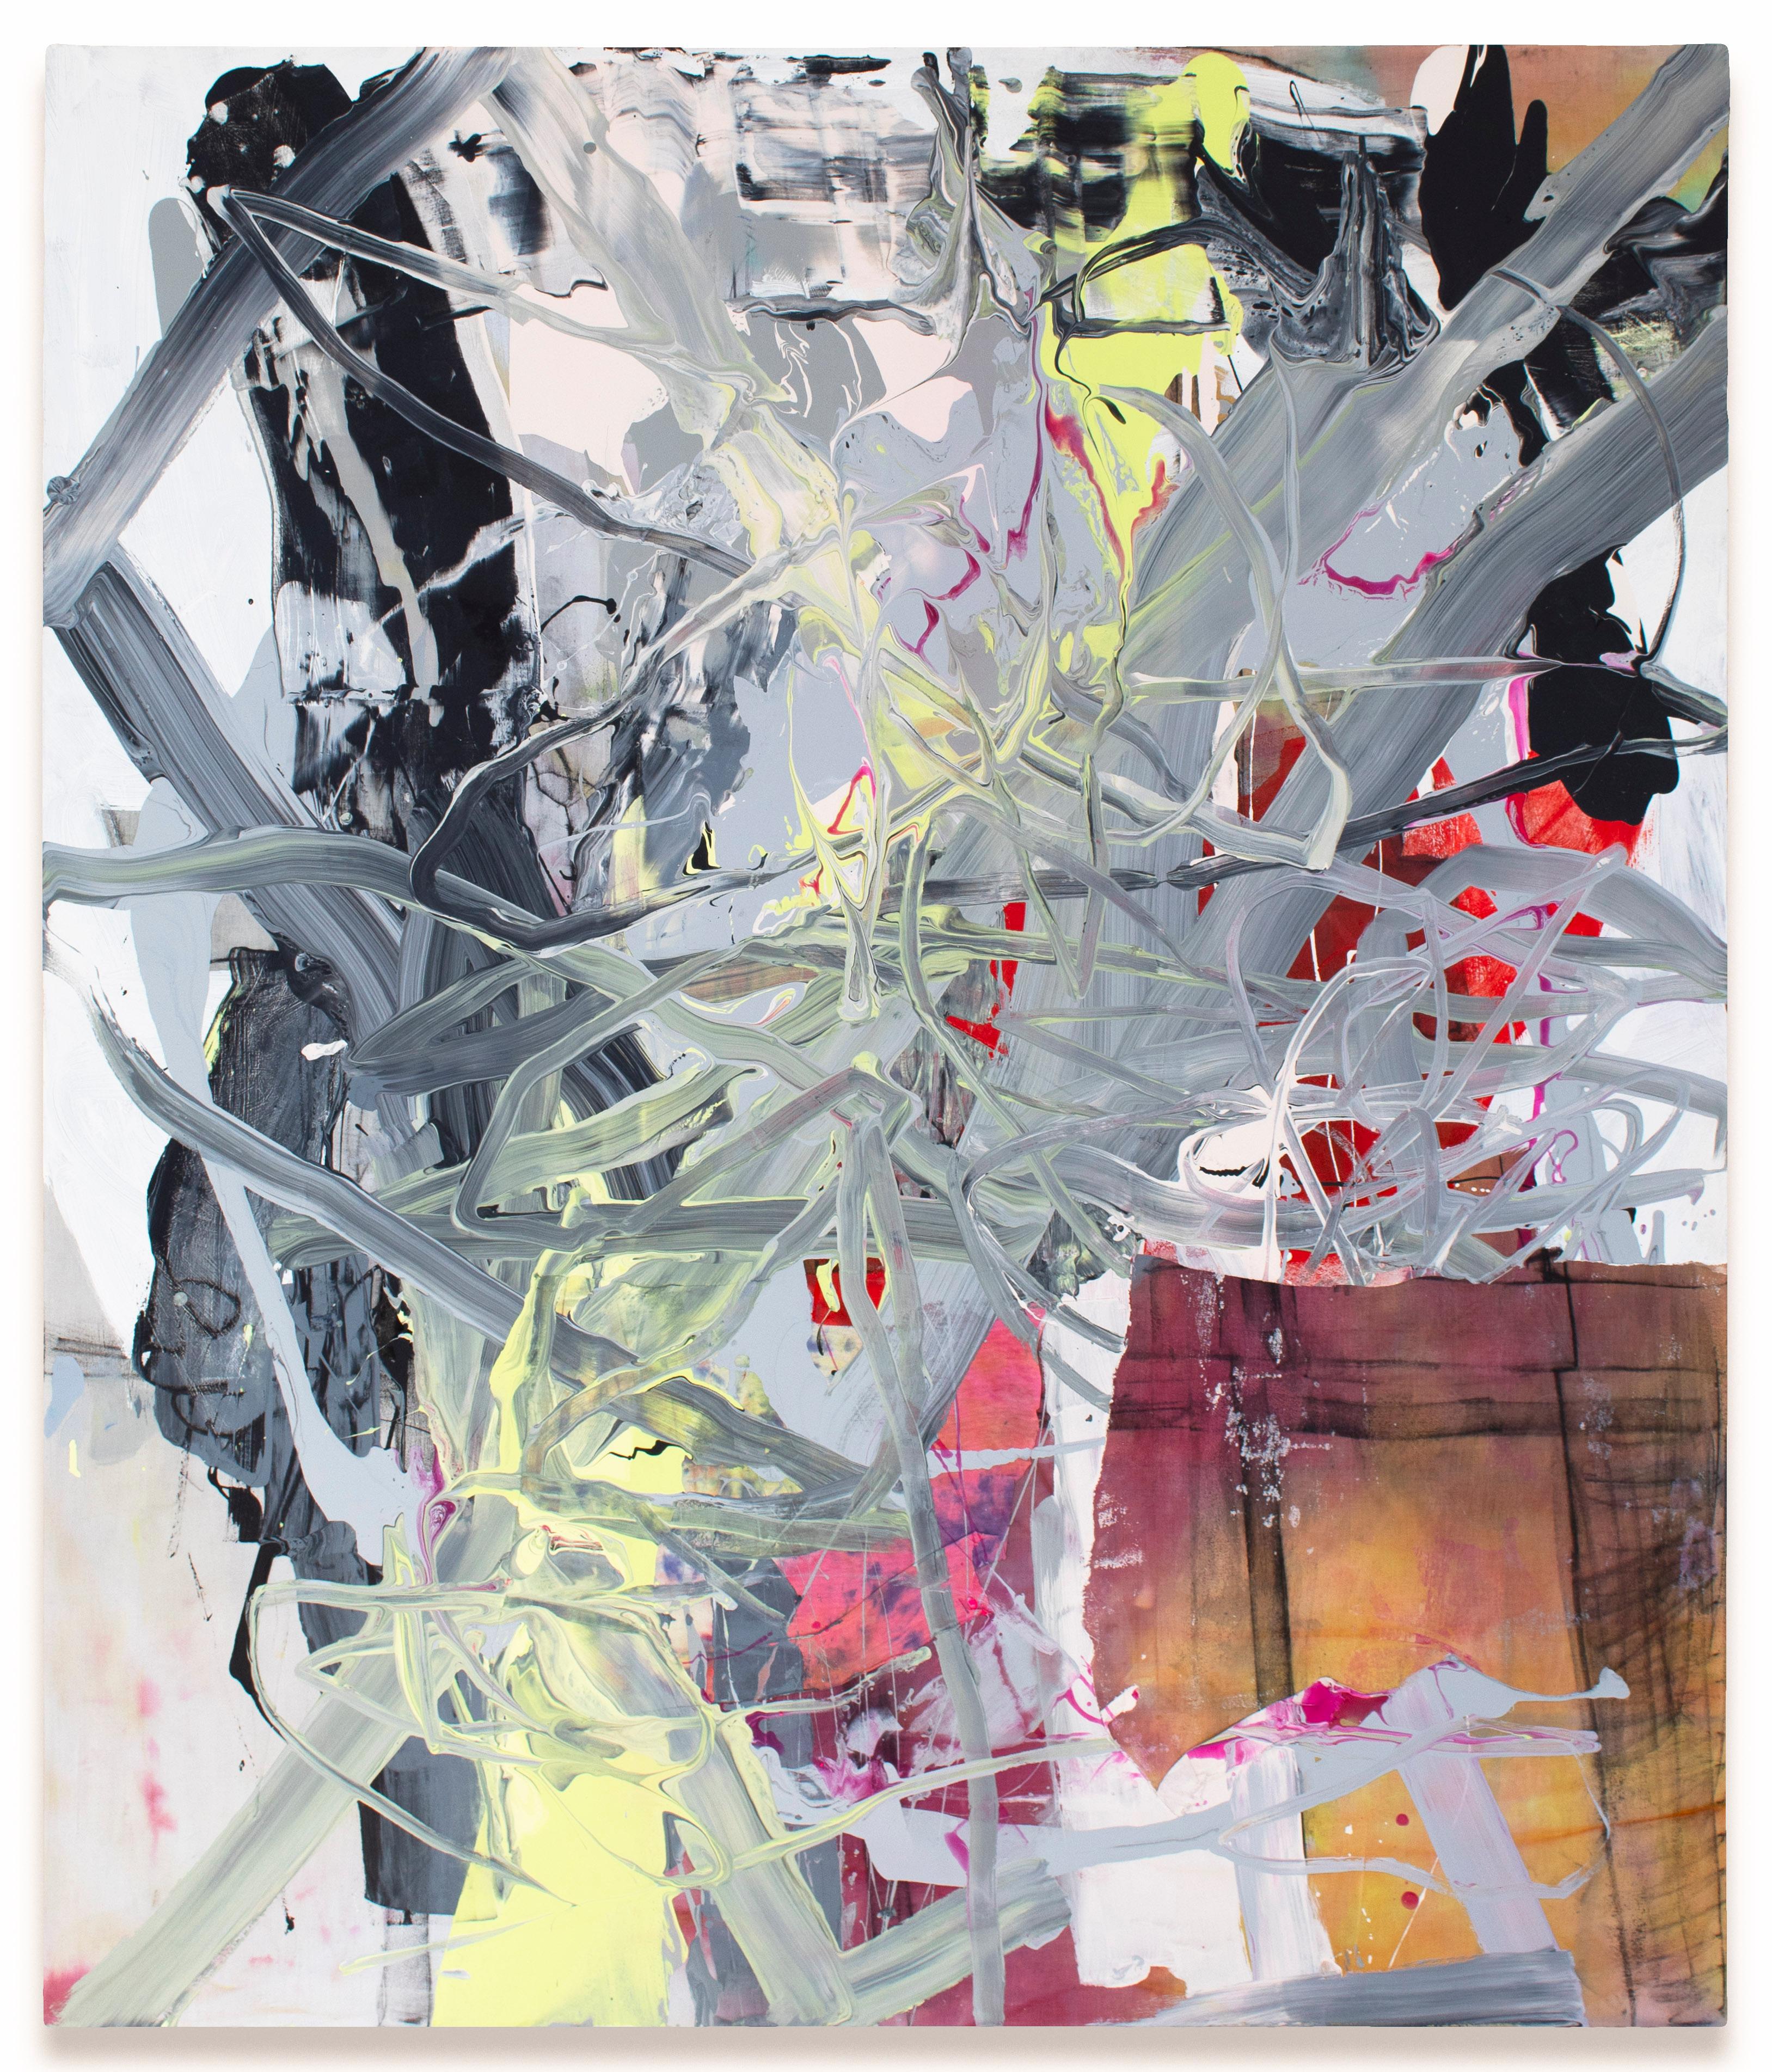 Georganna Greene Abstract Painting - Glow Root-Acrylic Paint, Charcoal, Dye, Fabric, Found Objects, Gray, Yellow, Red